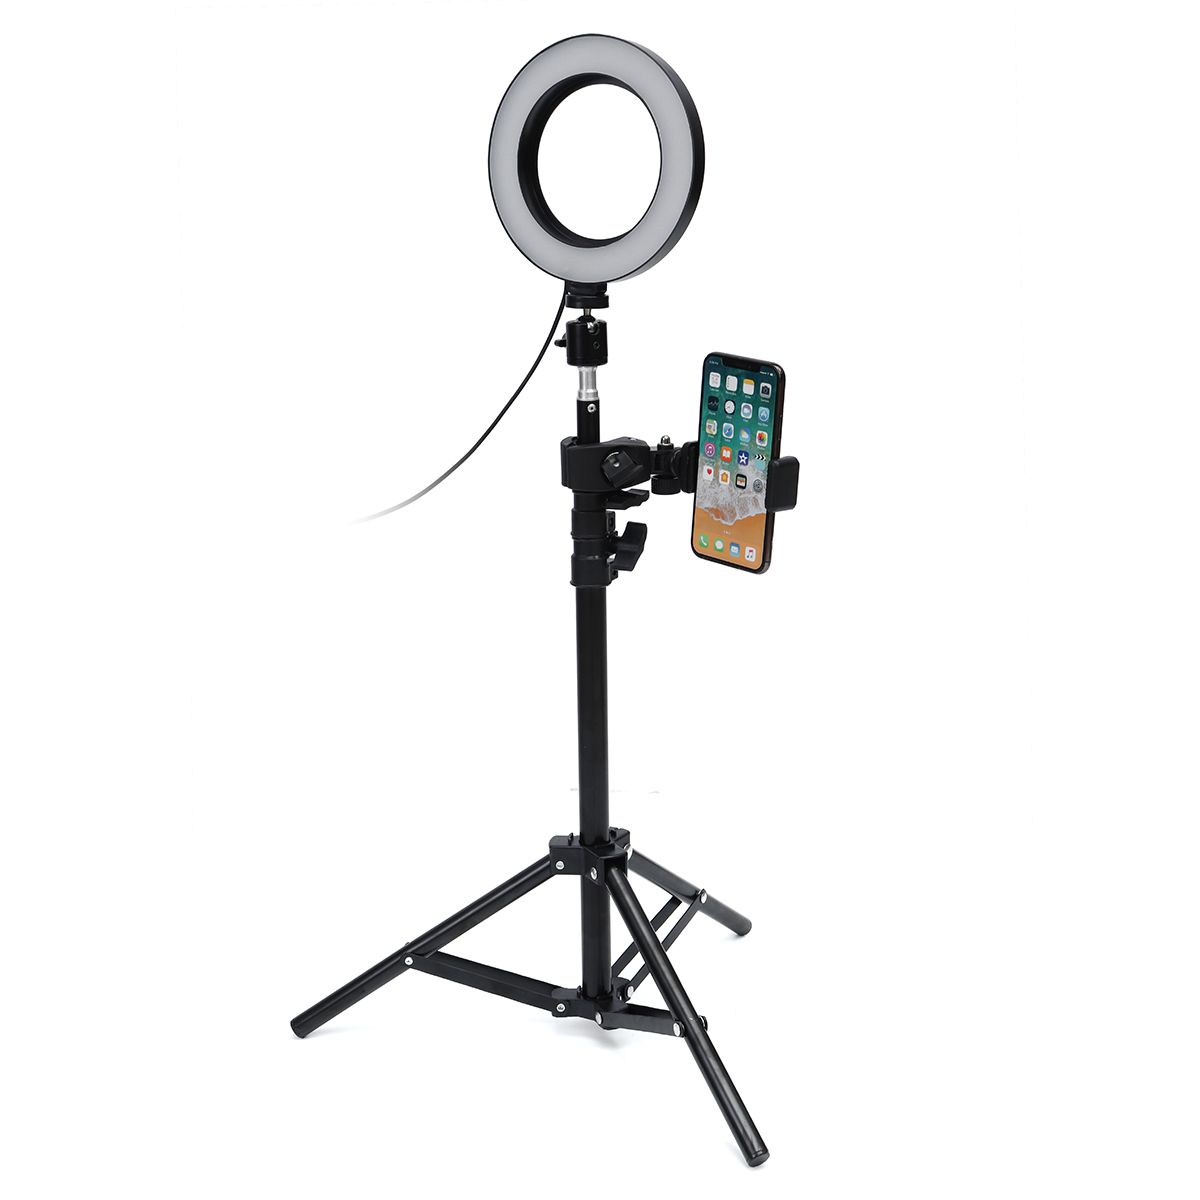 Dimmable-LED-Studio-Camera-Ring-Light-Makeup-Photo-Lamp-Selfie-Stand-USB-Plug-Tripod-with-Phone-Hold-1632867